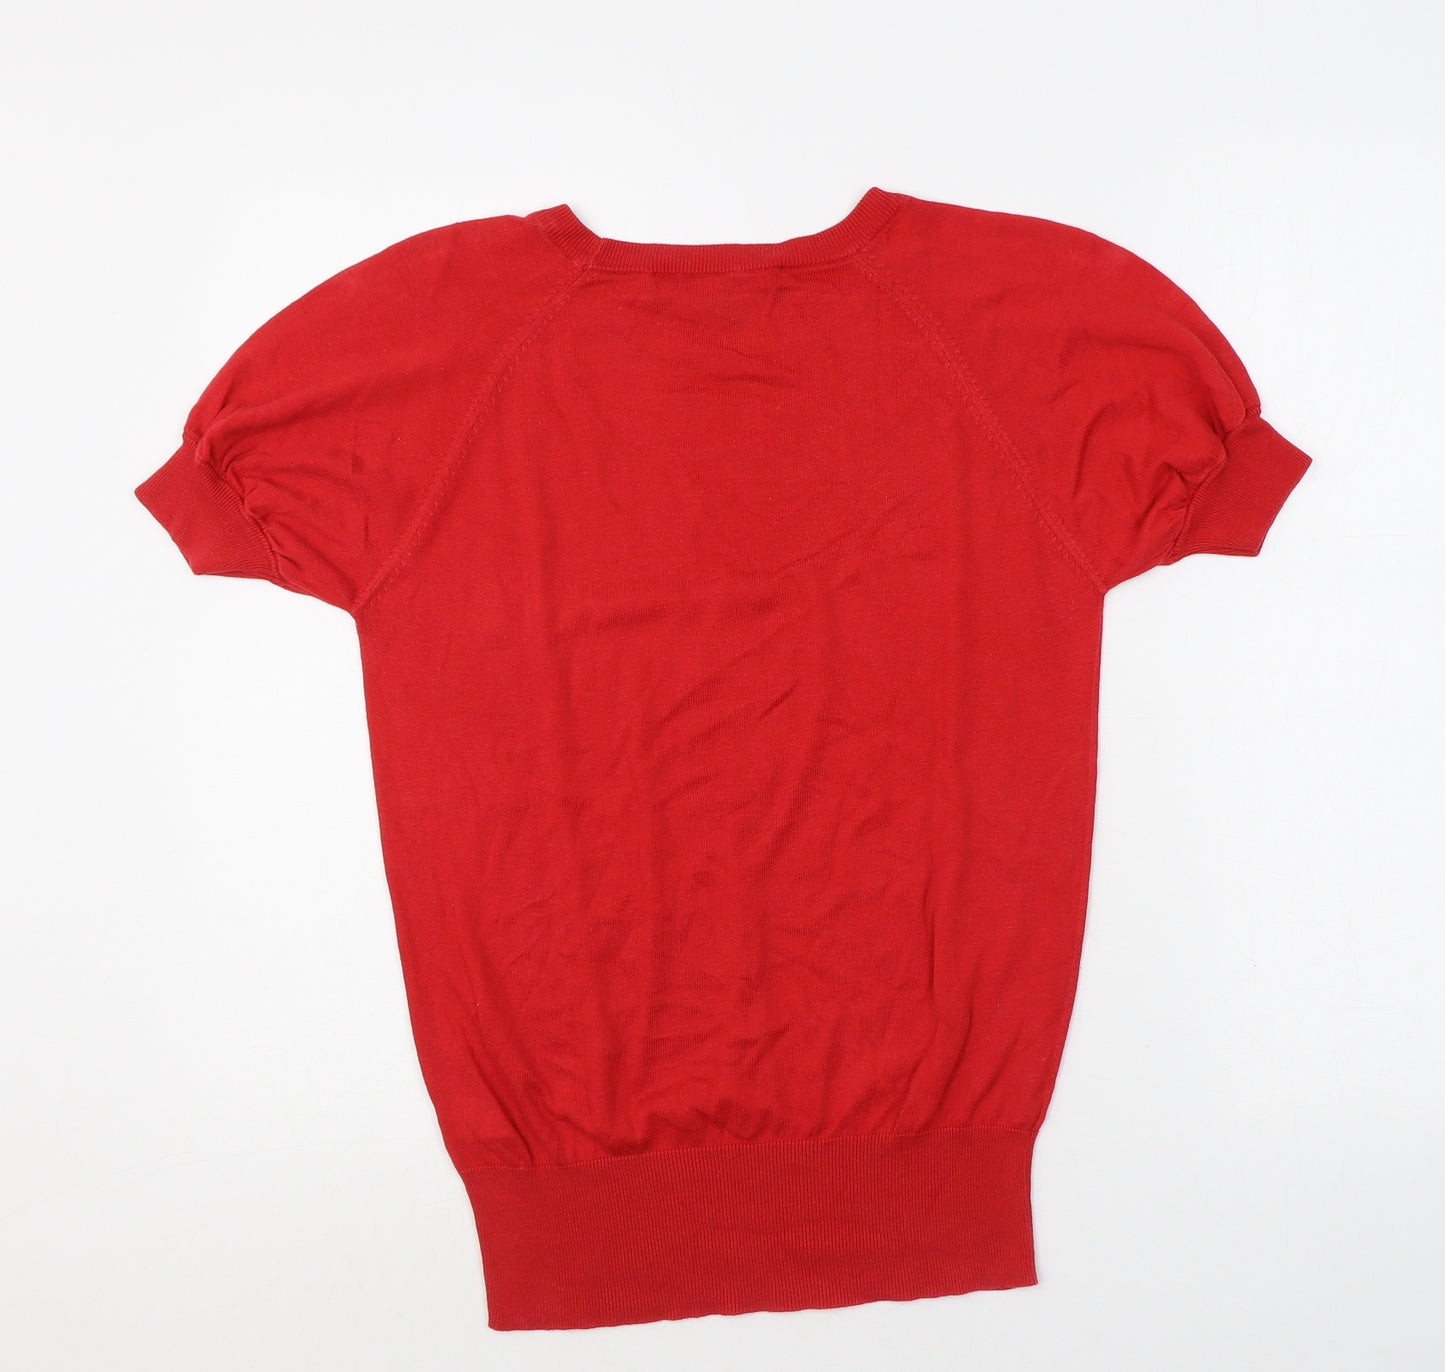 French Connection Womens Red Lyocell Basic T-Shirt Size XS Crew Neck